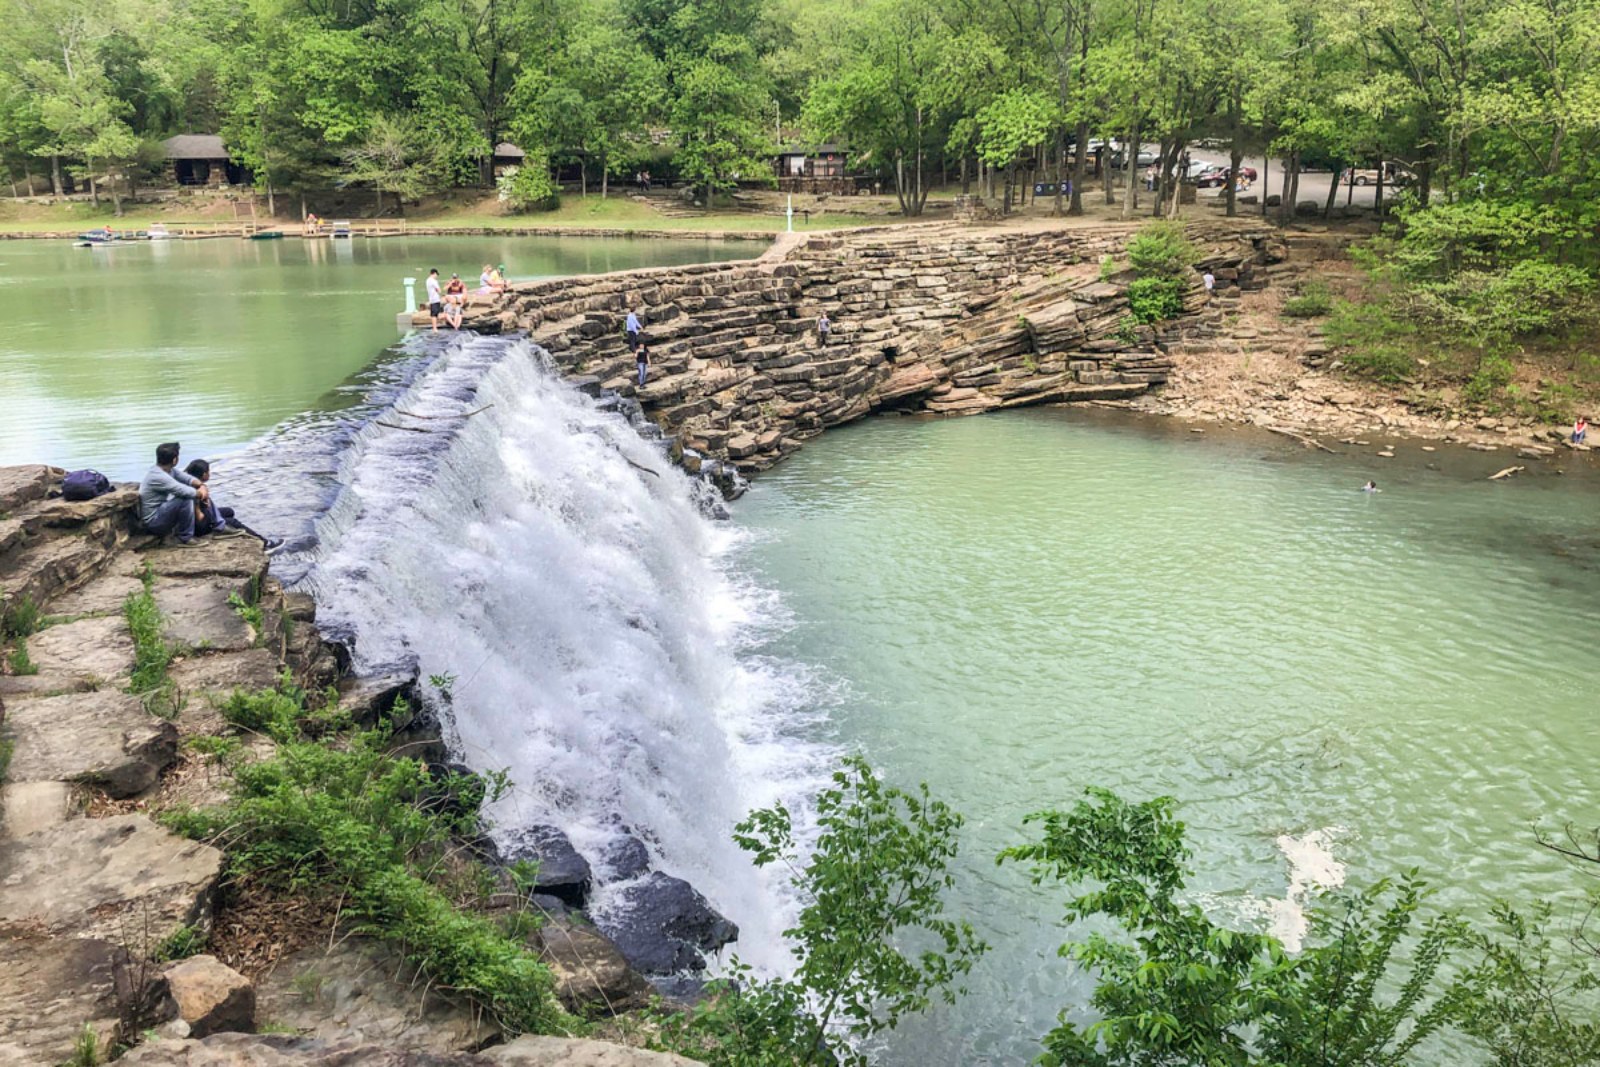 The dam waterfall at Devil’s Den State Park is easy to see from the parking lot or by a short walk. (Photo by Sony Hocklander)